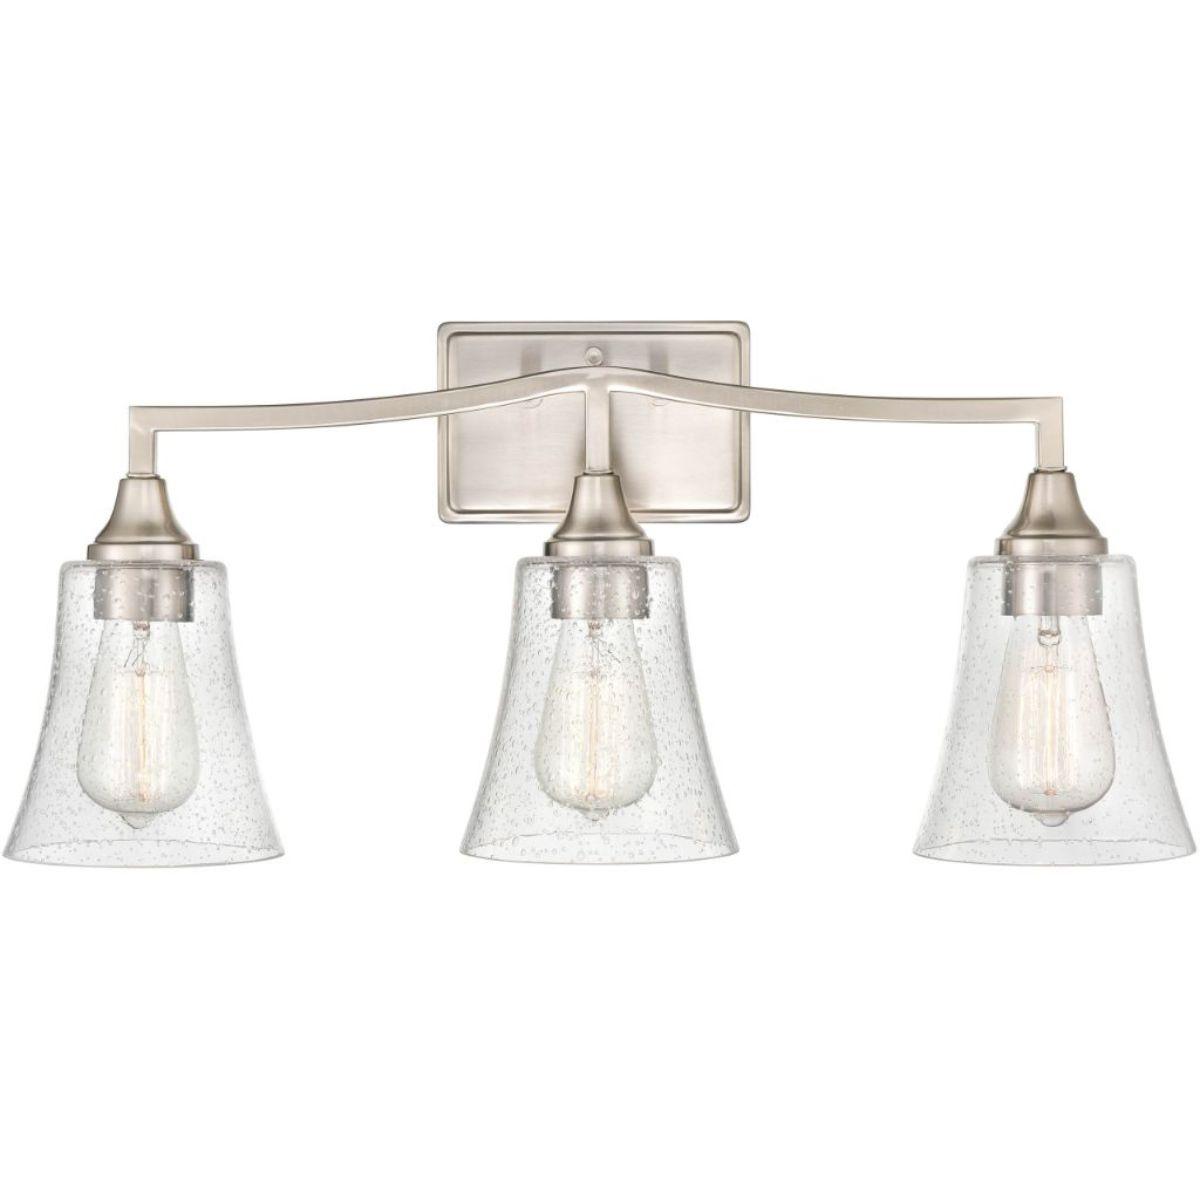 Caily 24 in 3 Lights Vanity Light